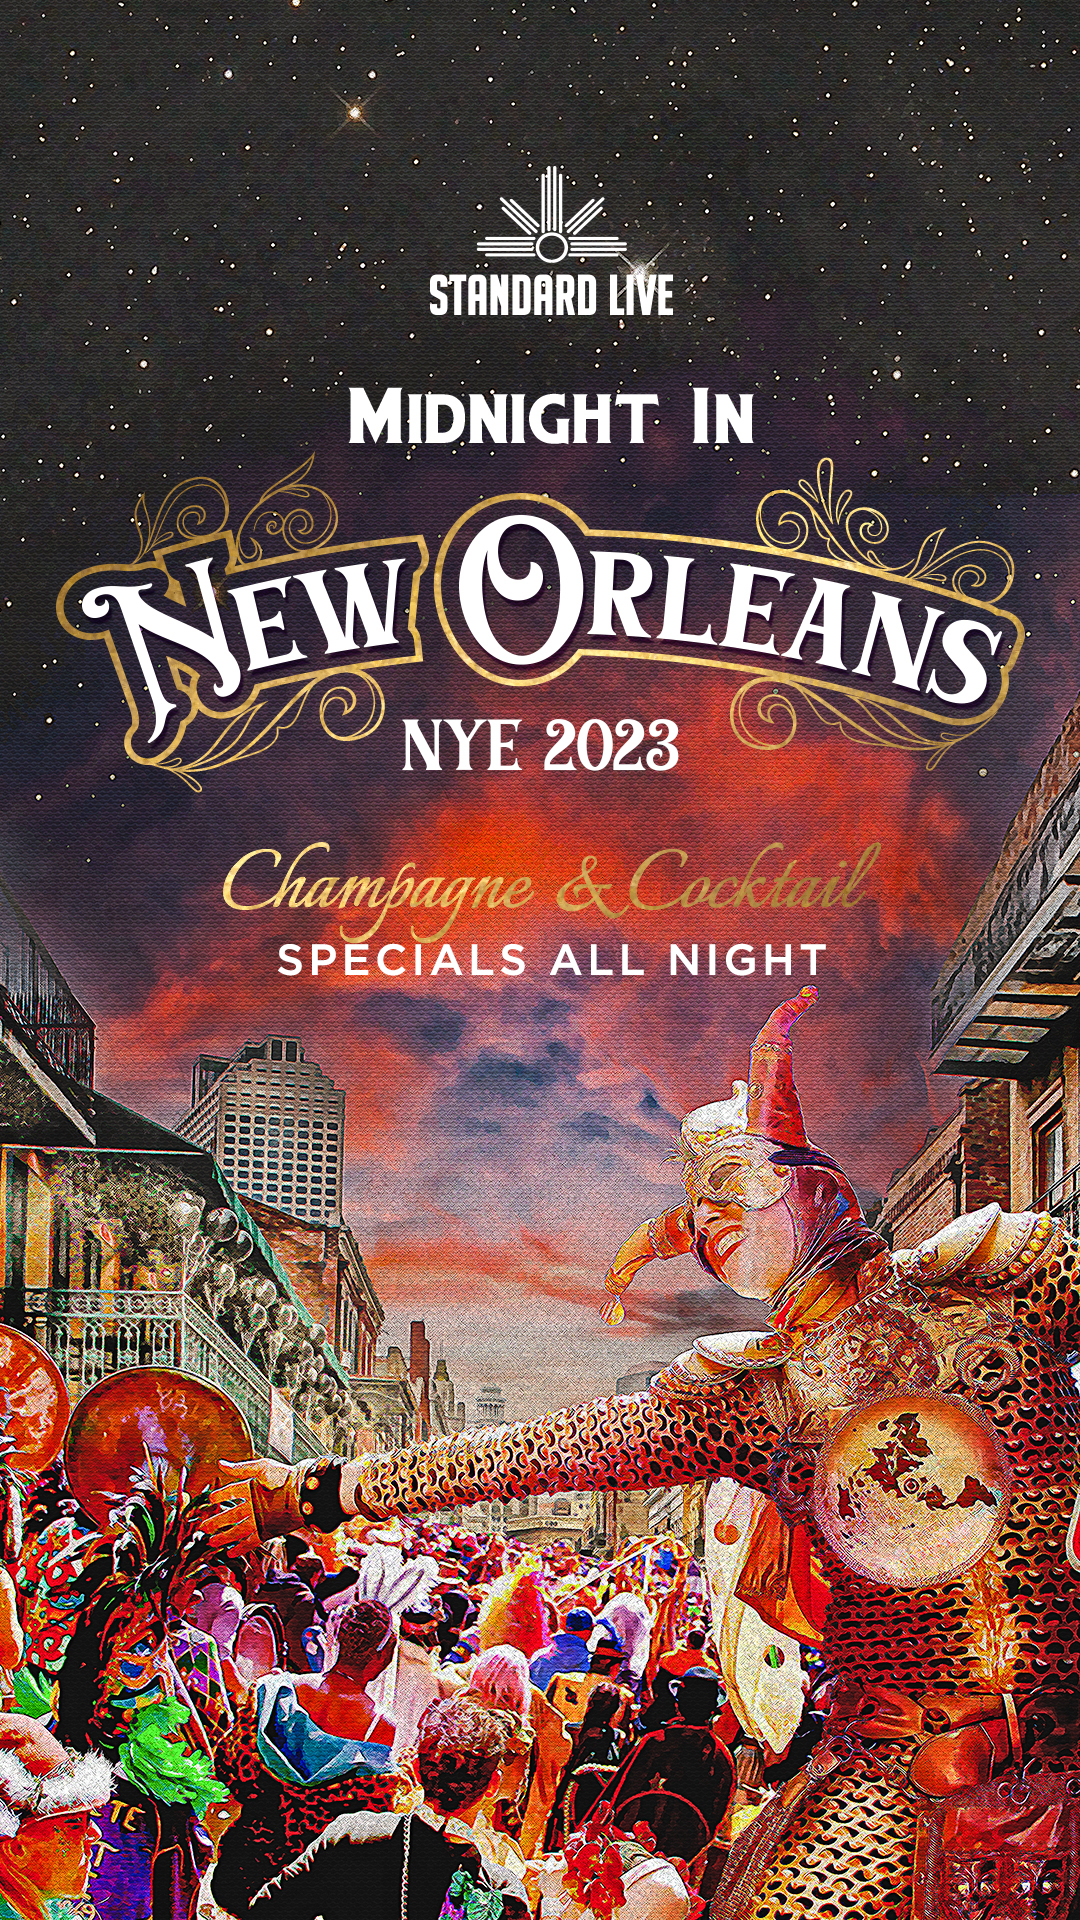 Midnight In New Orleans @ Standard Live Short North